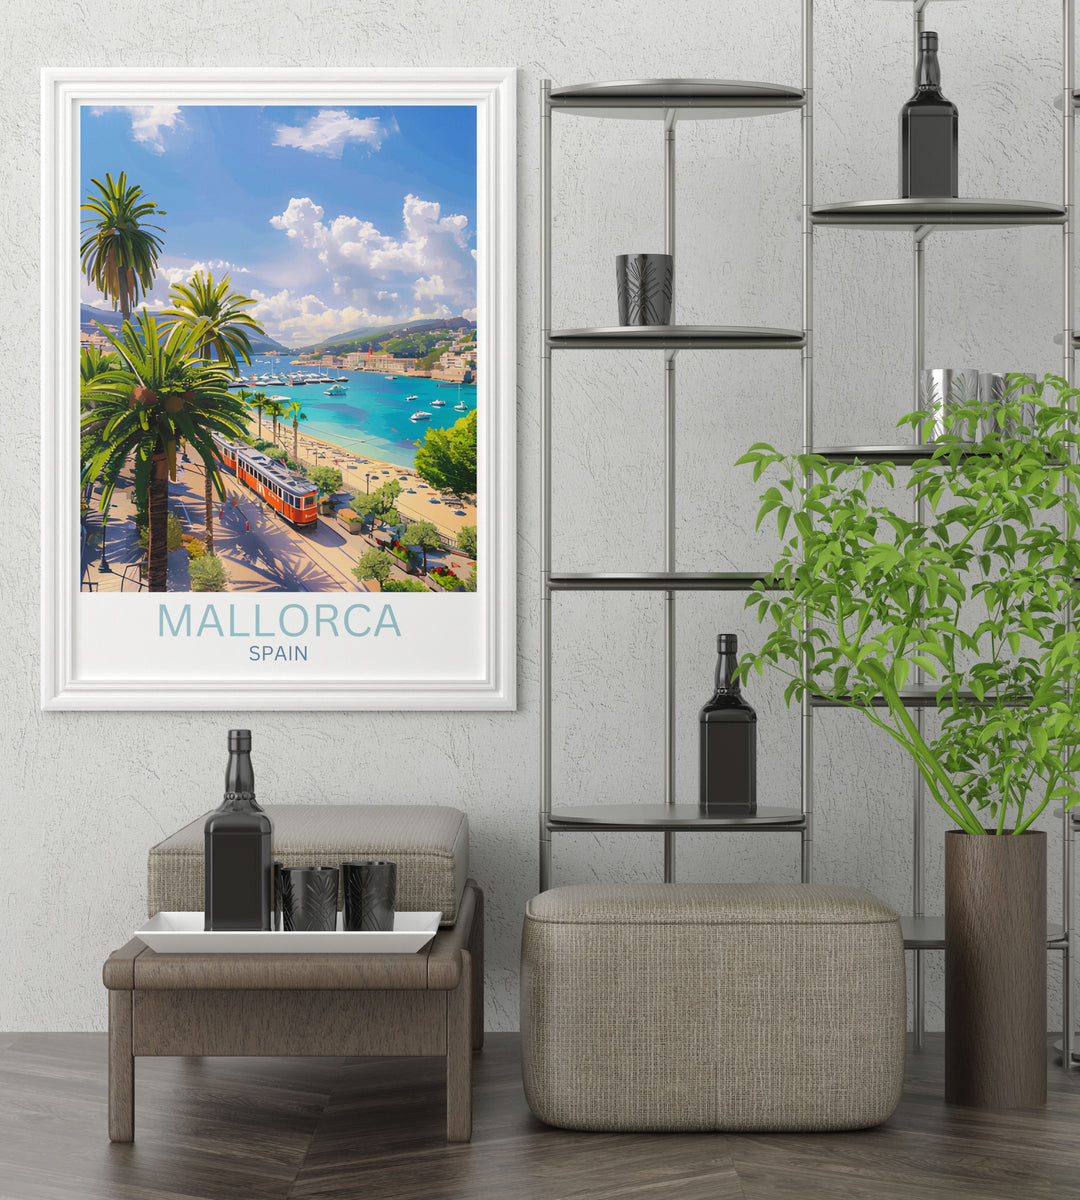 Canvas print celebrating Spanish architecture and street scenes, bringing the essence of Spain into your home.